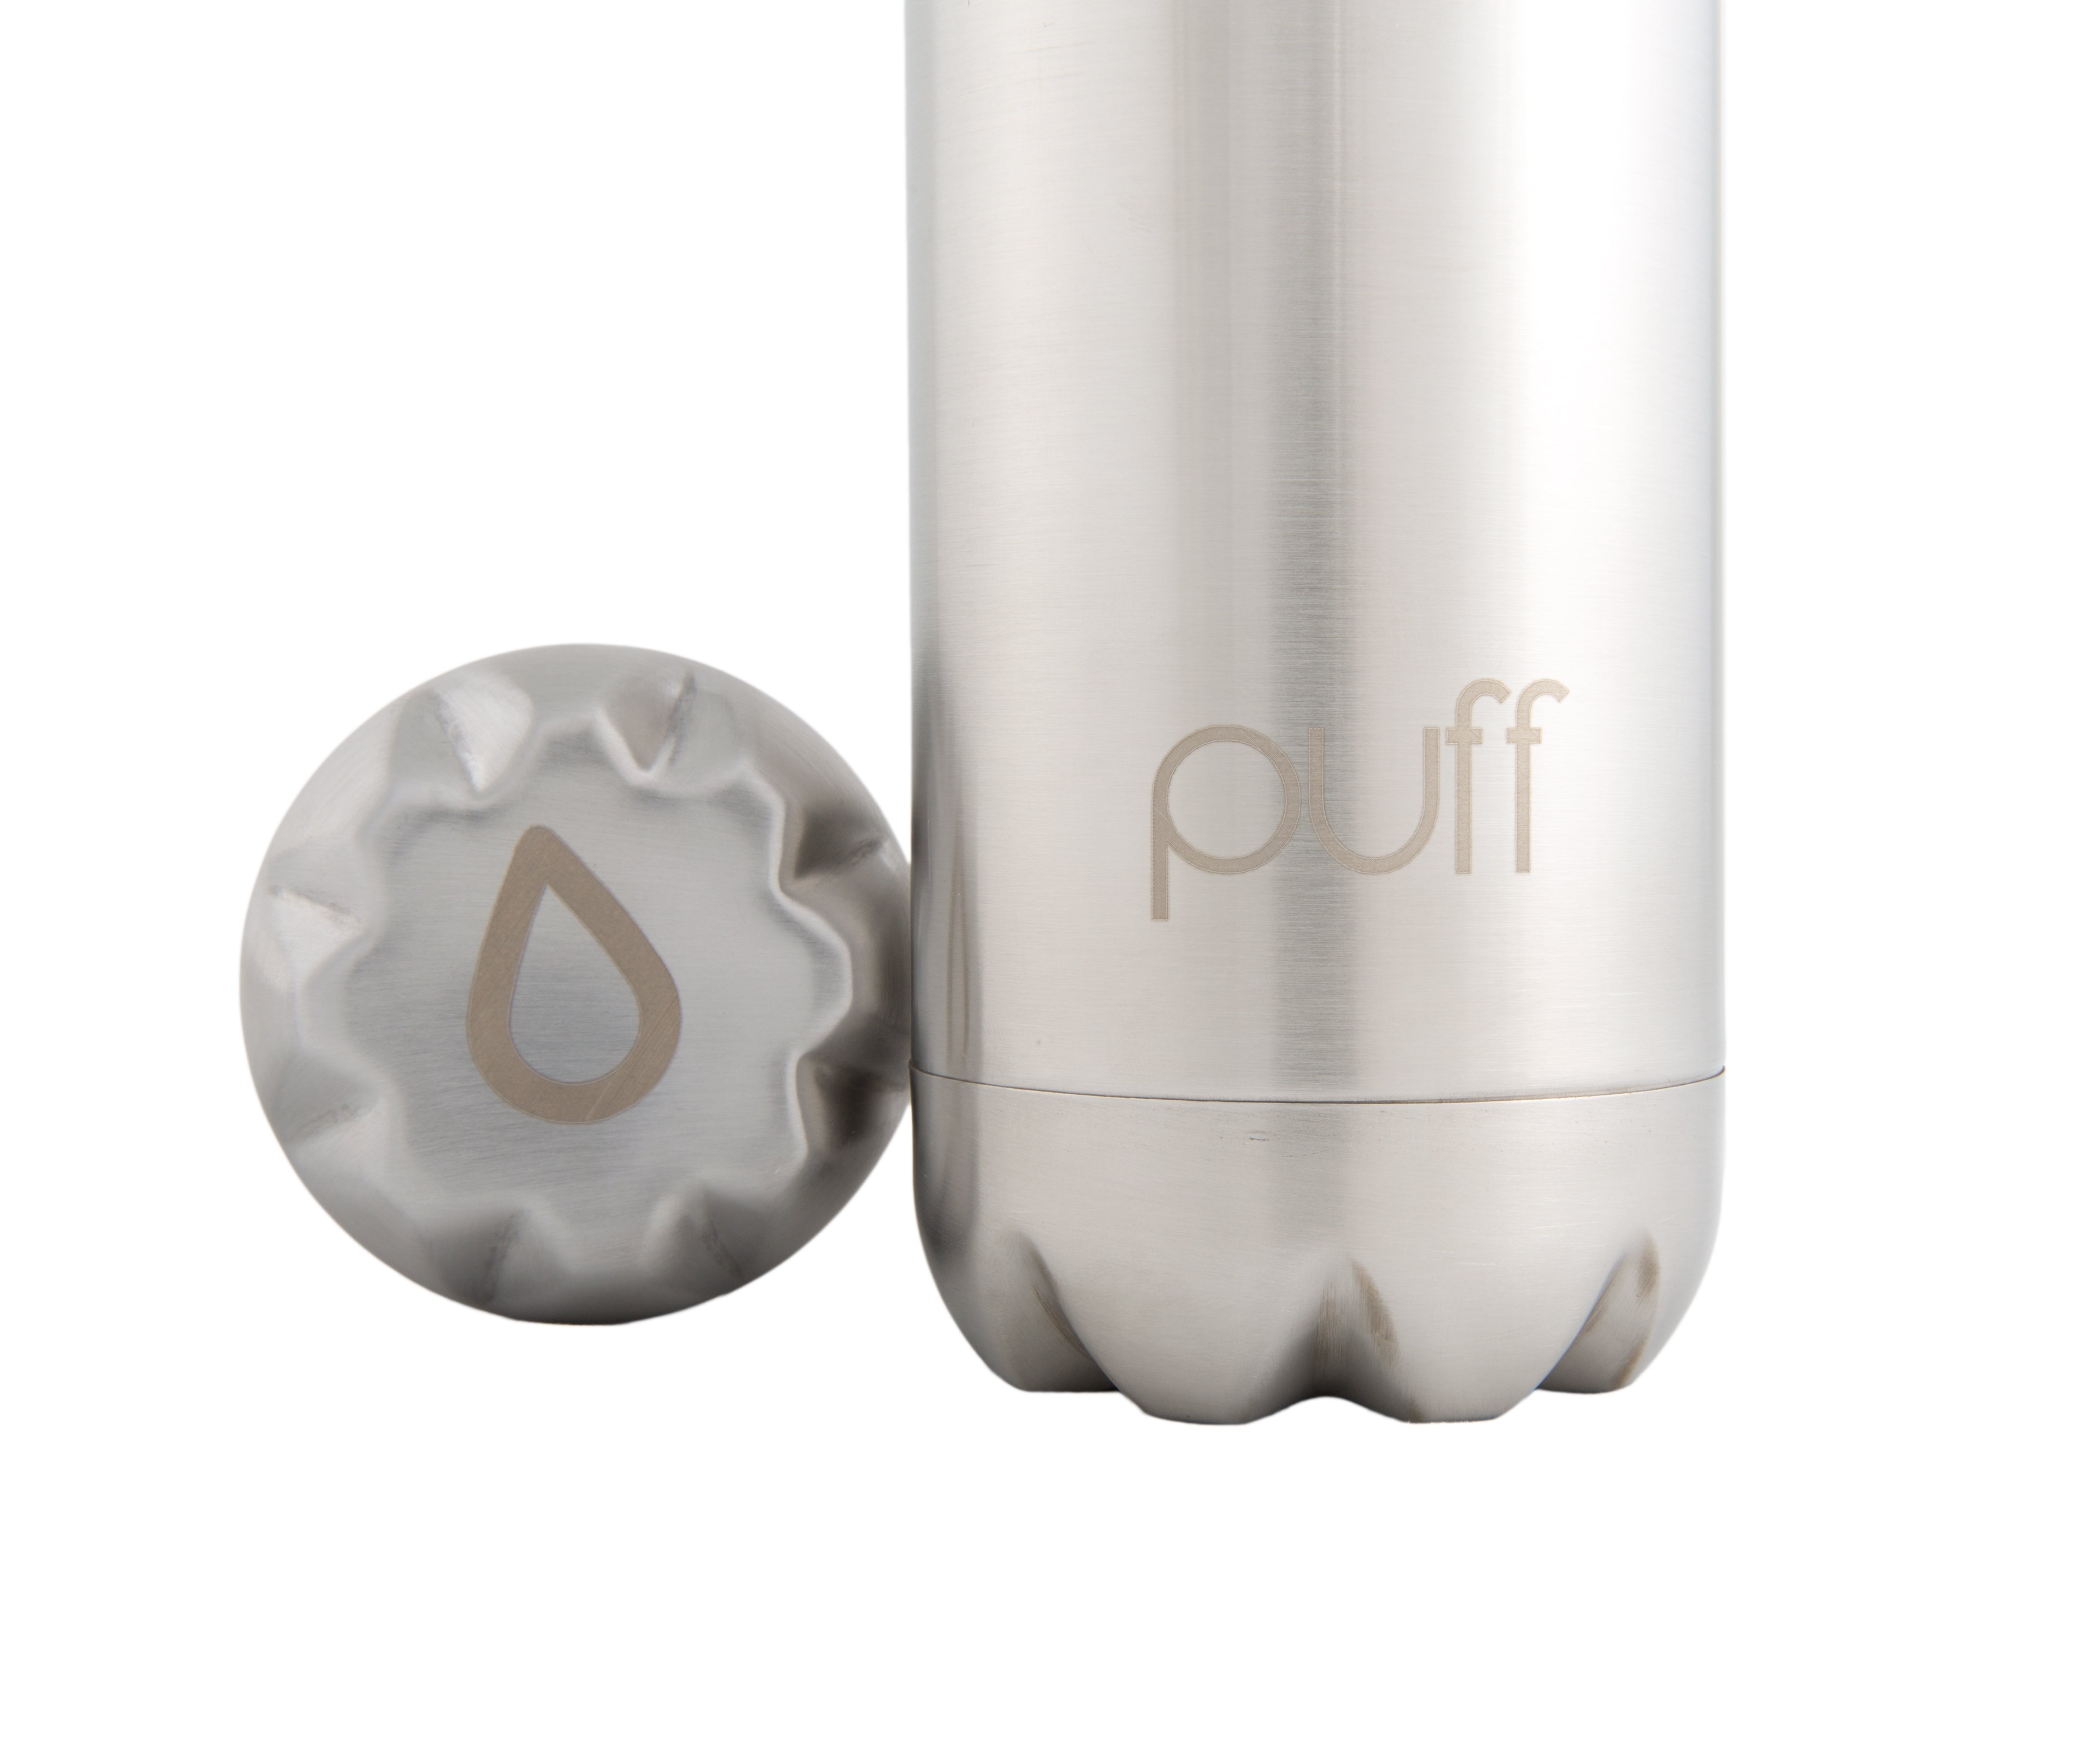 puff | Silver Stainless Steel Bottle. "500ml"